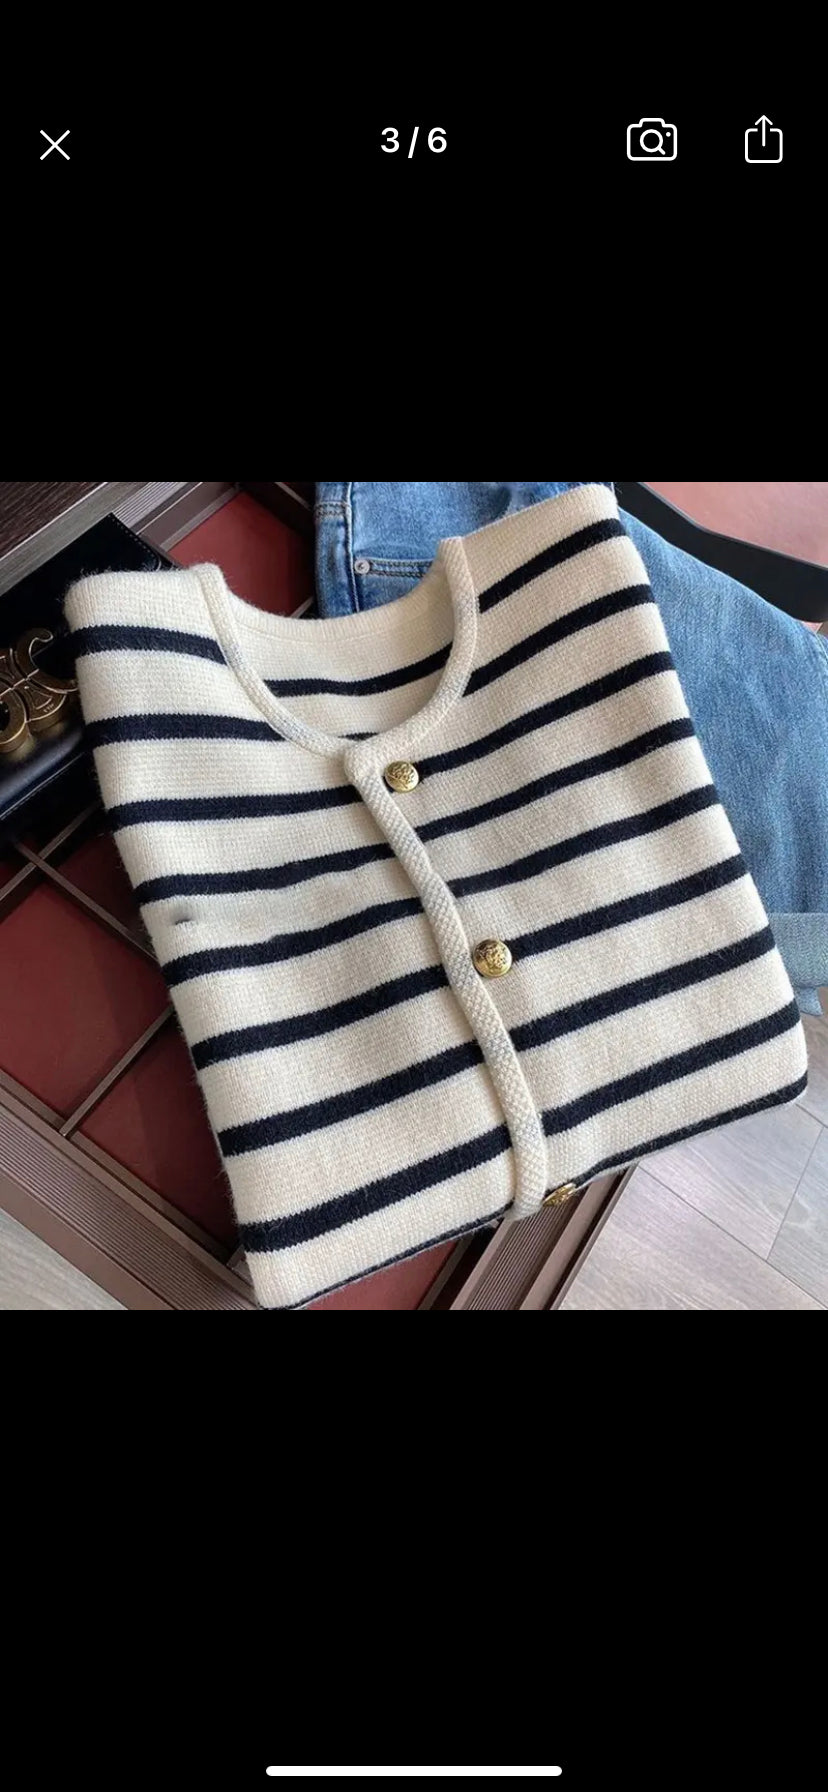 Black and White Striped Cardigan